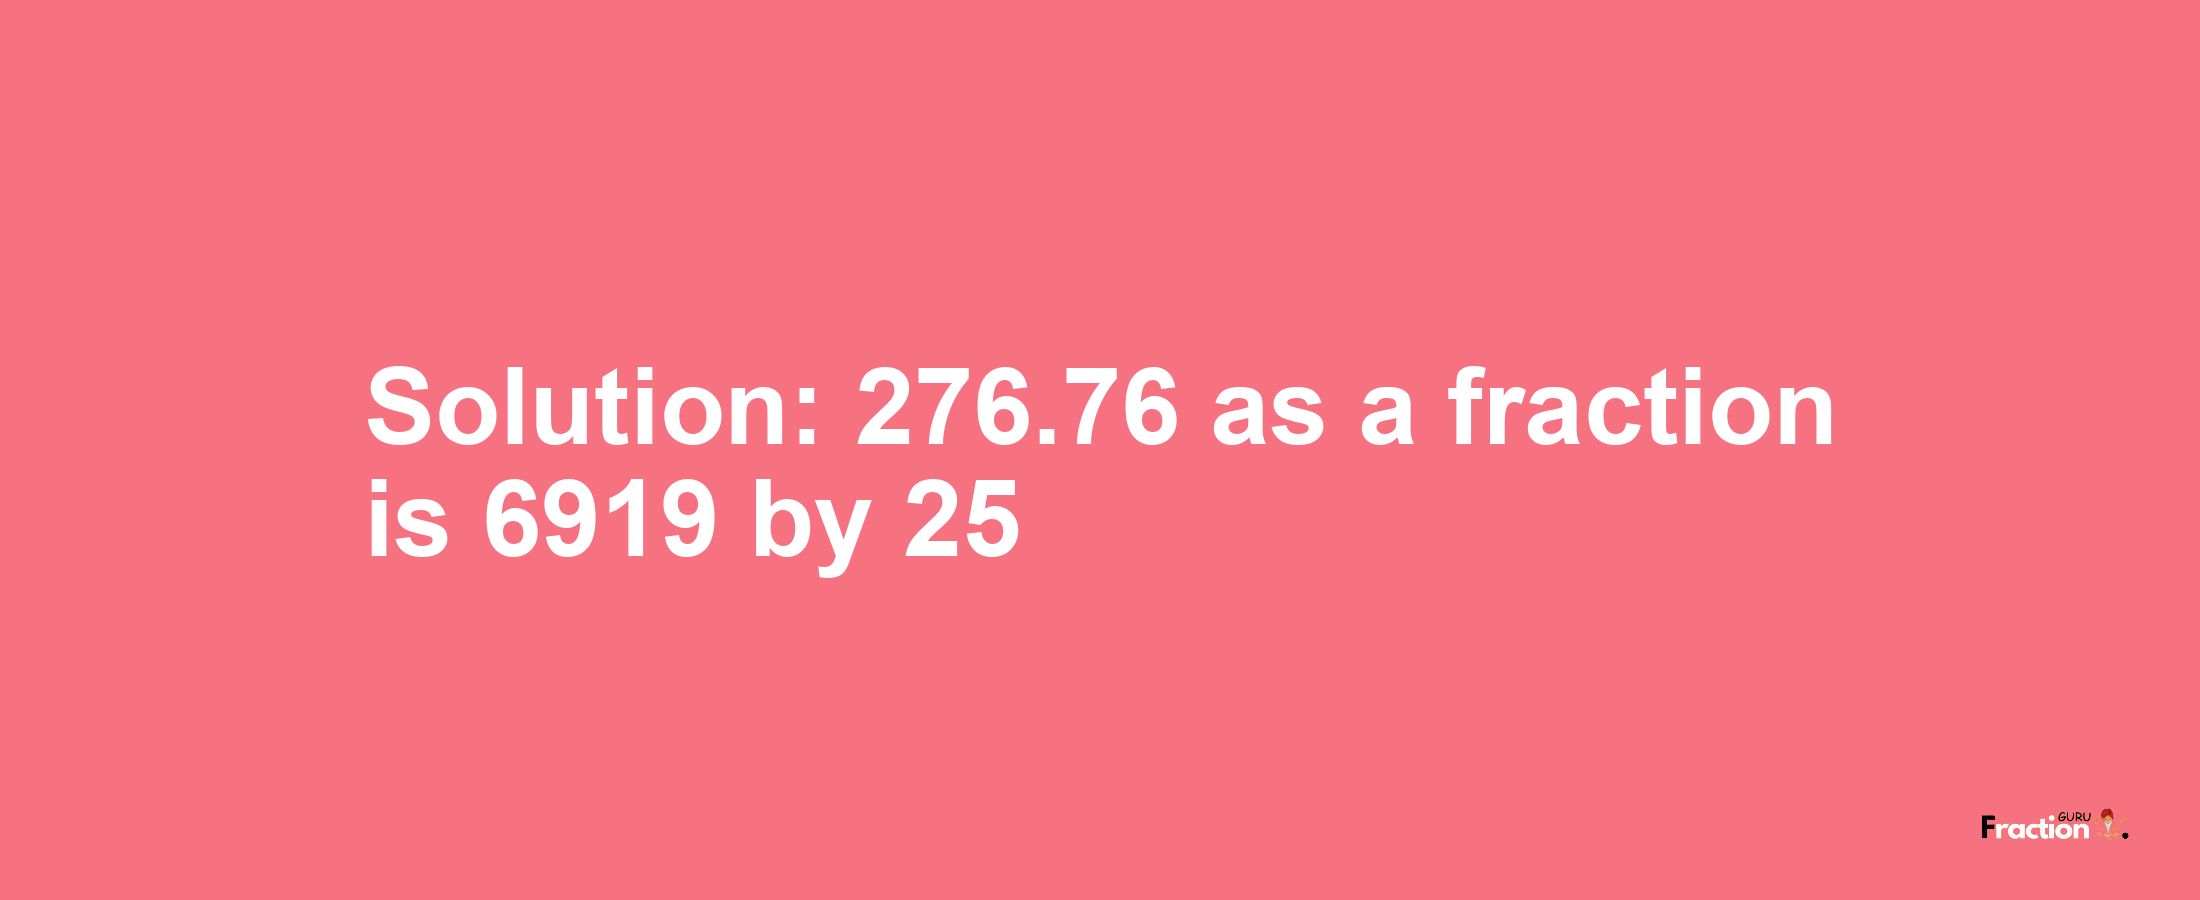 Solution:276.76 as a fraction is 6919/25